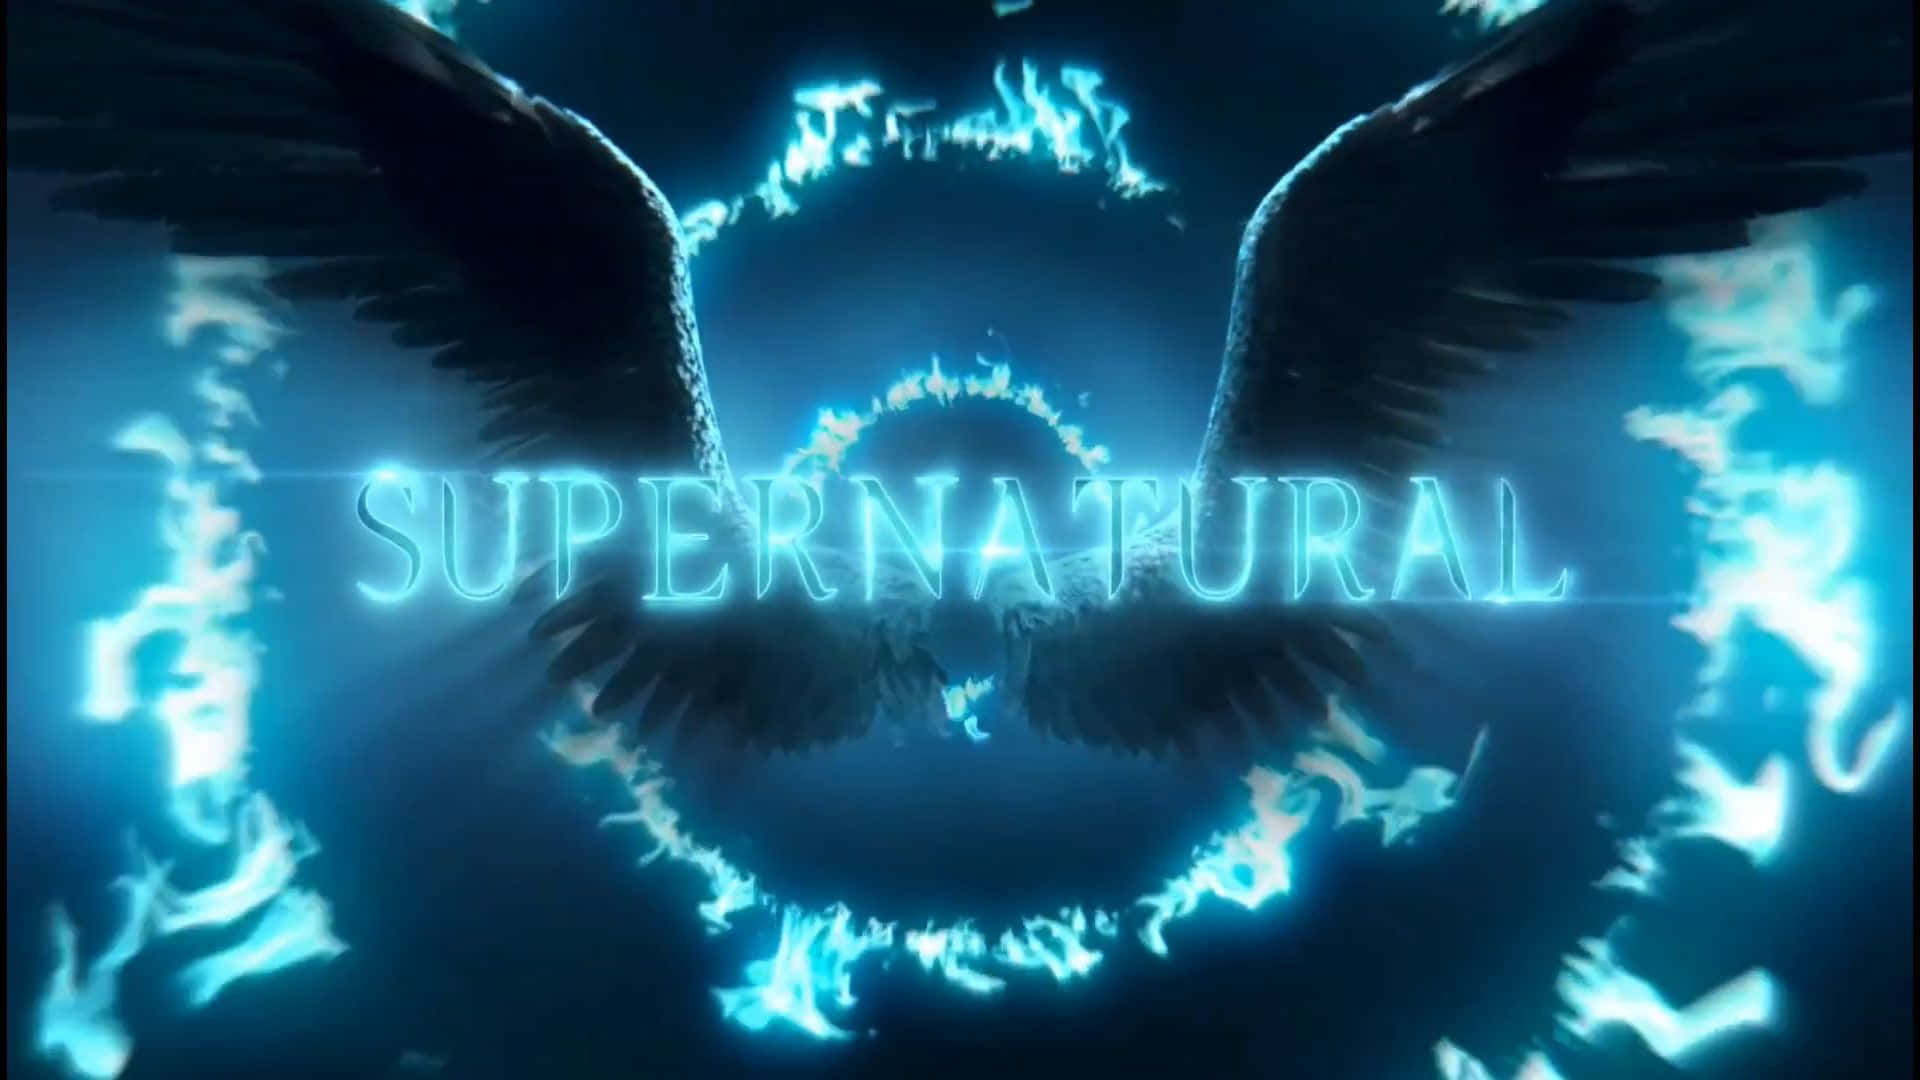 Follow The Hero's Journey: Join Sam and Dean on their supernatural journey